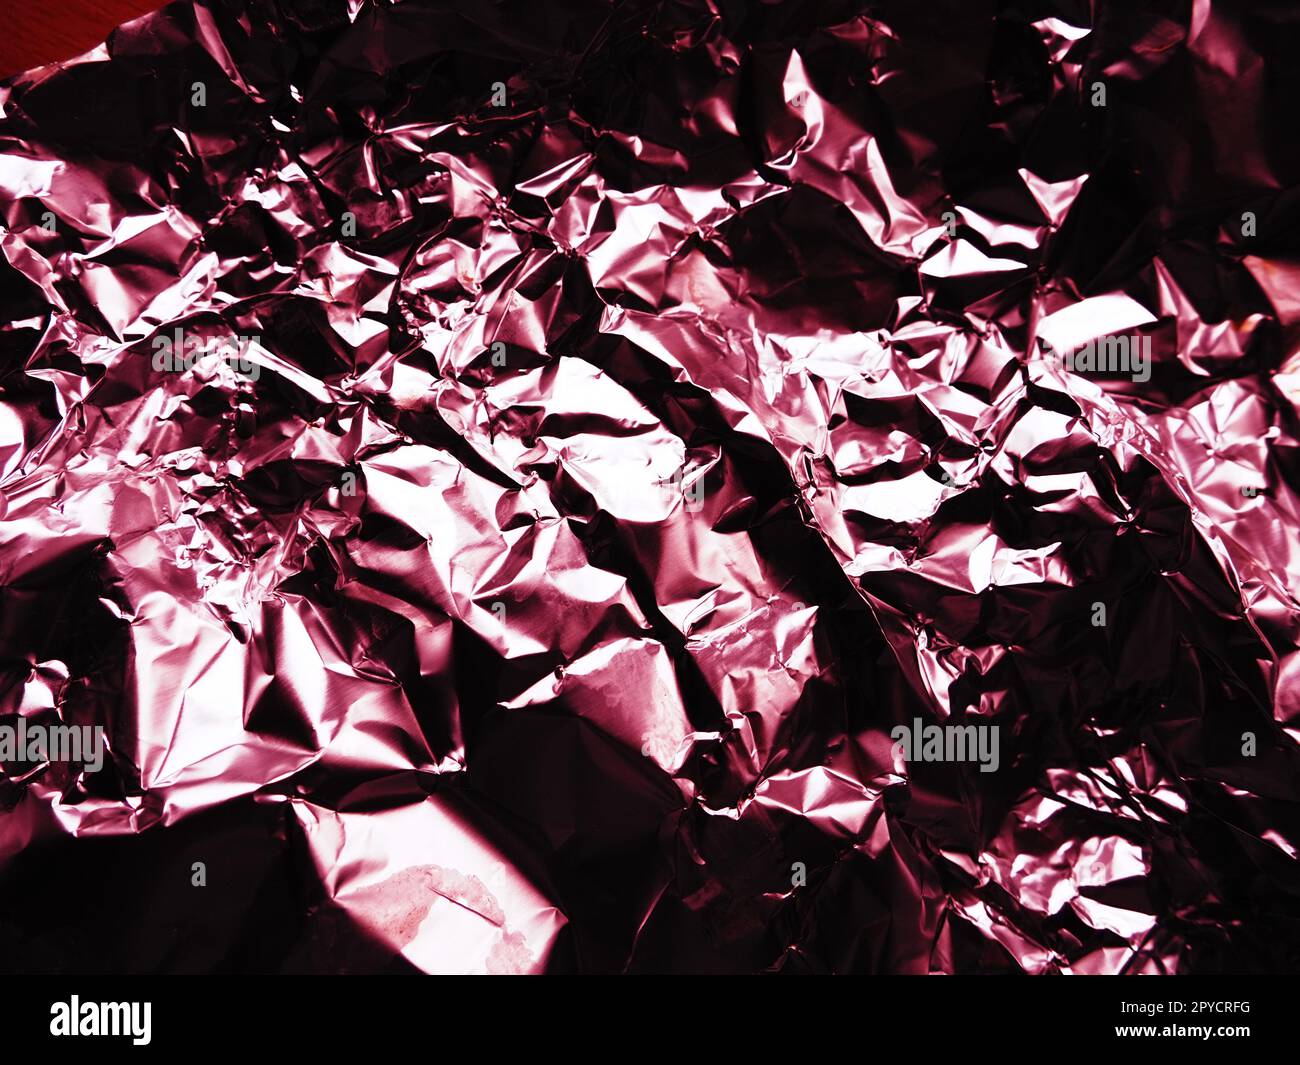 foil close-up. Aluminum silver crumpled foil. Abstract metallic background. Foil for baking food. Background with a red or burgundy tint Stock Photo